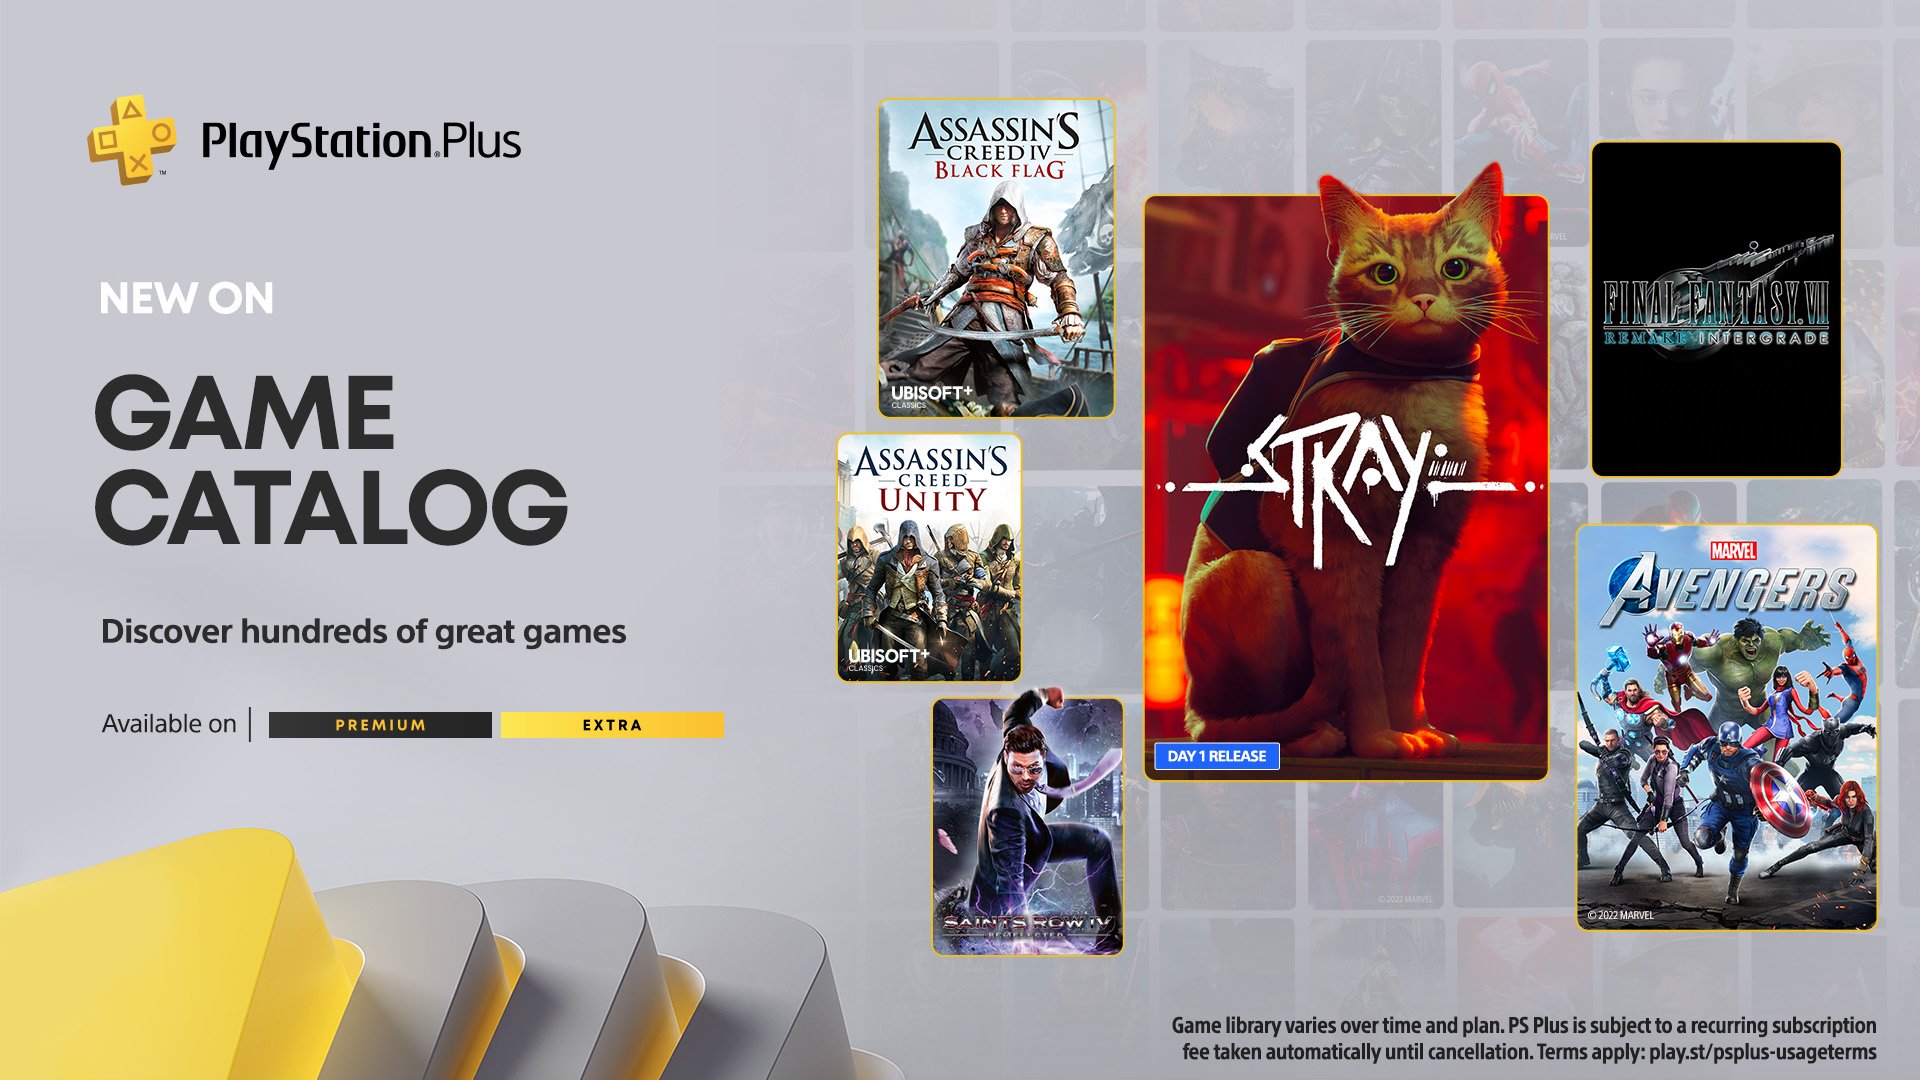 # PlayStation Plus Game Catalog and Classics Catalog games for July 2022 announced